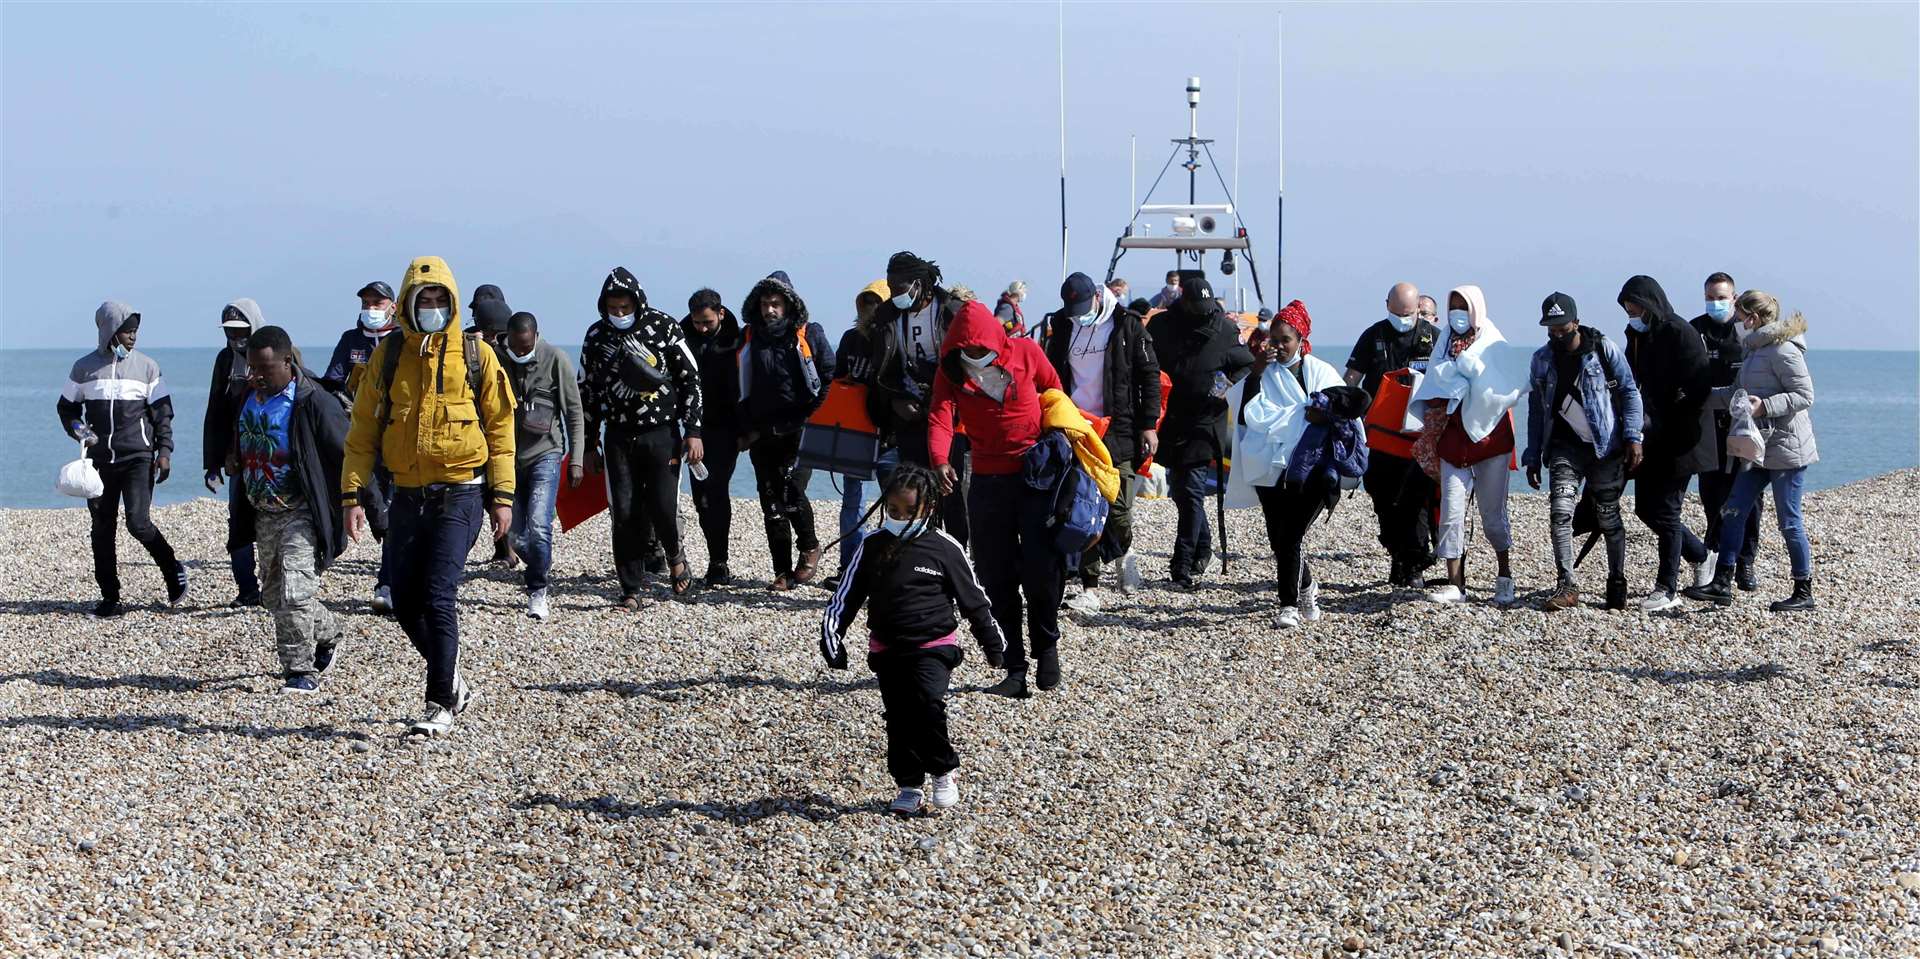 Asylum seekers arrive at Dungeness beach after being rescued at sea by the RNLI. Picture: Sean Aidan